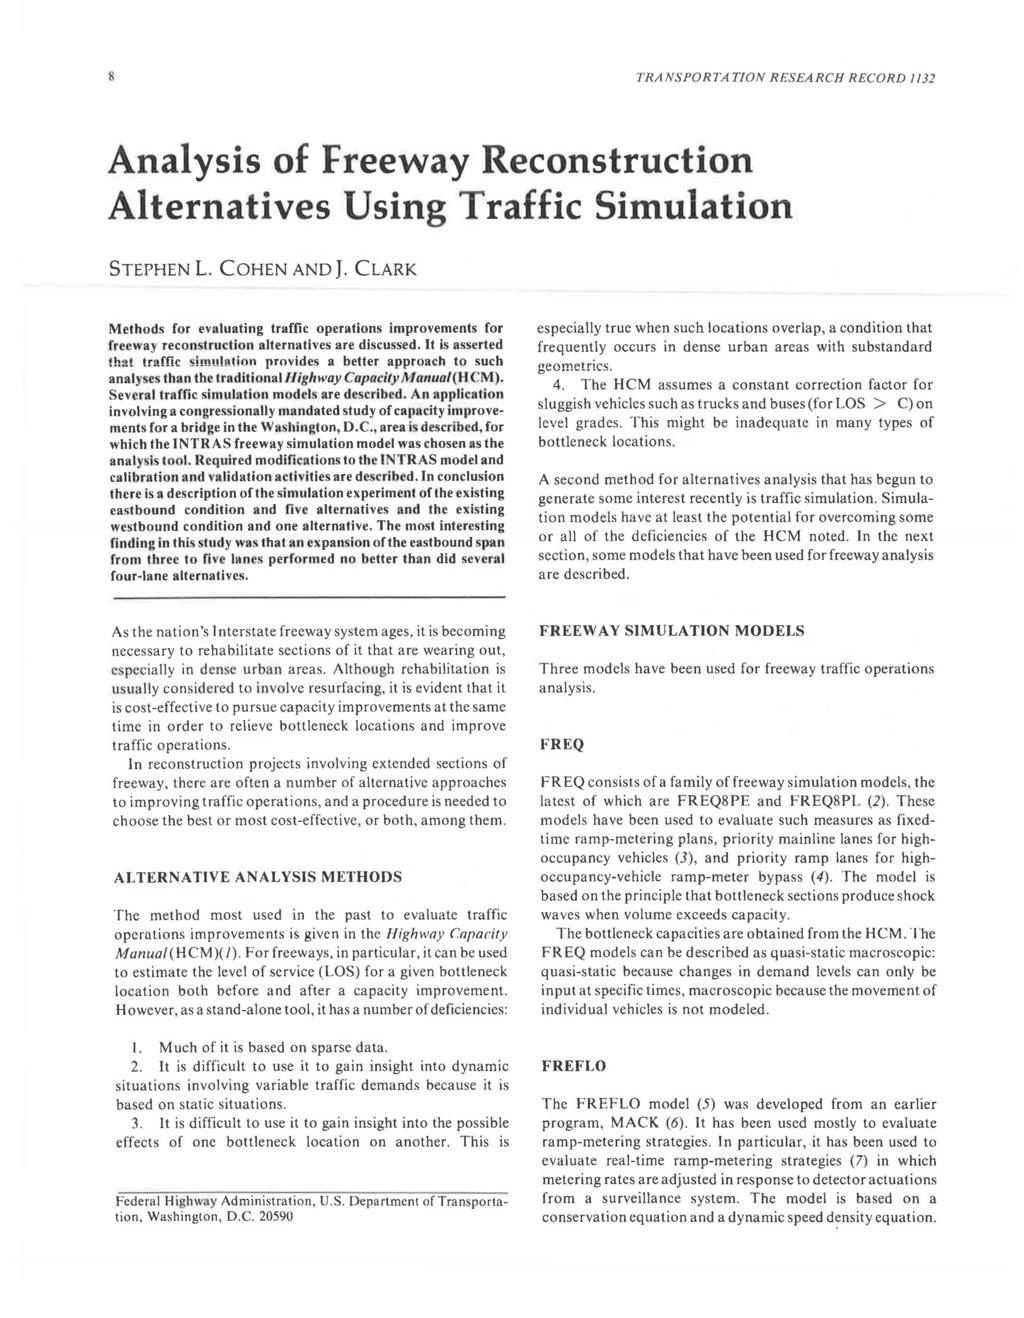 8 TRANSPORTATION RESEARCH RECORD l/32 Analysis of Freeway Reconstruction Alternatives Using Traffic Simulation STEPHEN L. COHEN AND J.